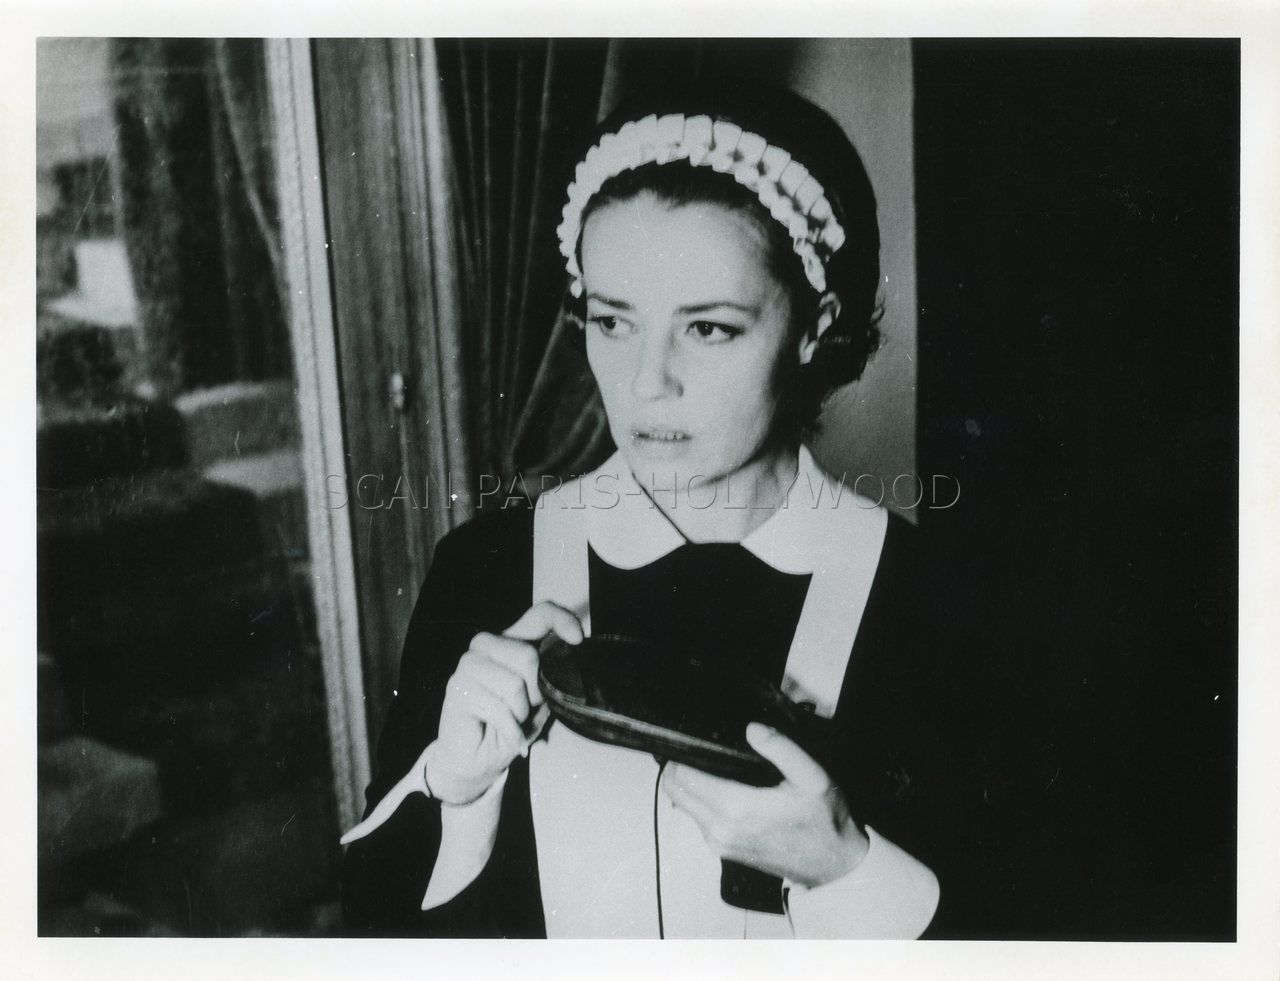  photo F021- JEANNE MOREAU MICHEL PICCOLI GEORGES GERET THE DIARY OF A CHAMBERMAID 1964003_zps1td8ncqu.jpg